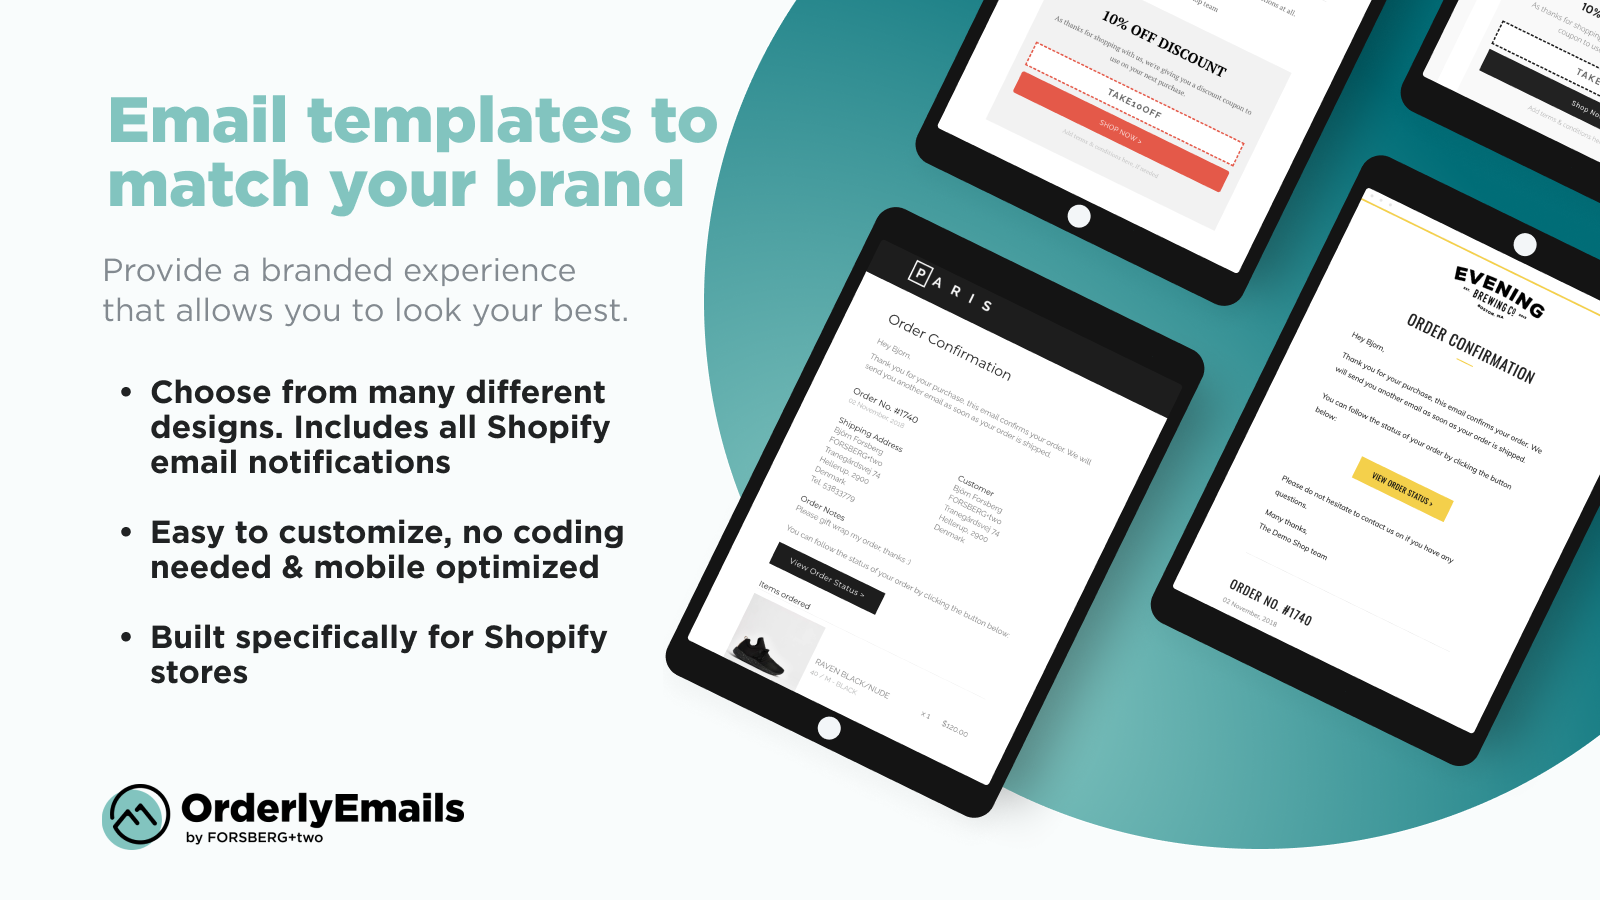 OrderlyEmails: Email templates to match your brand